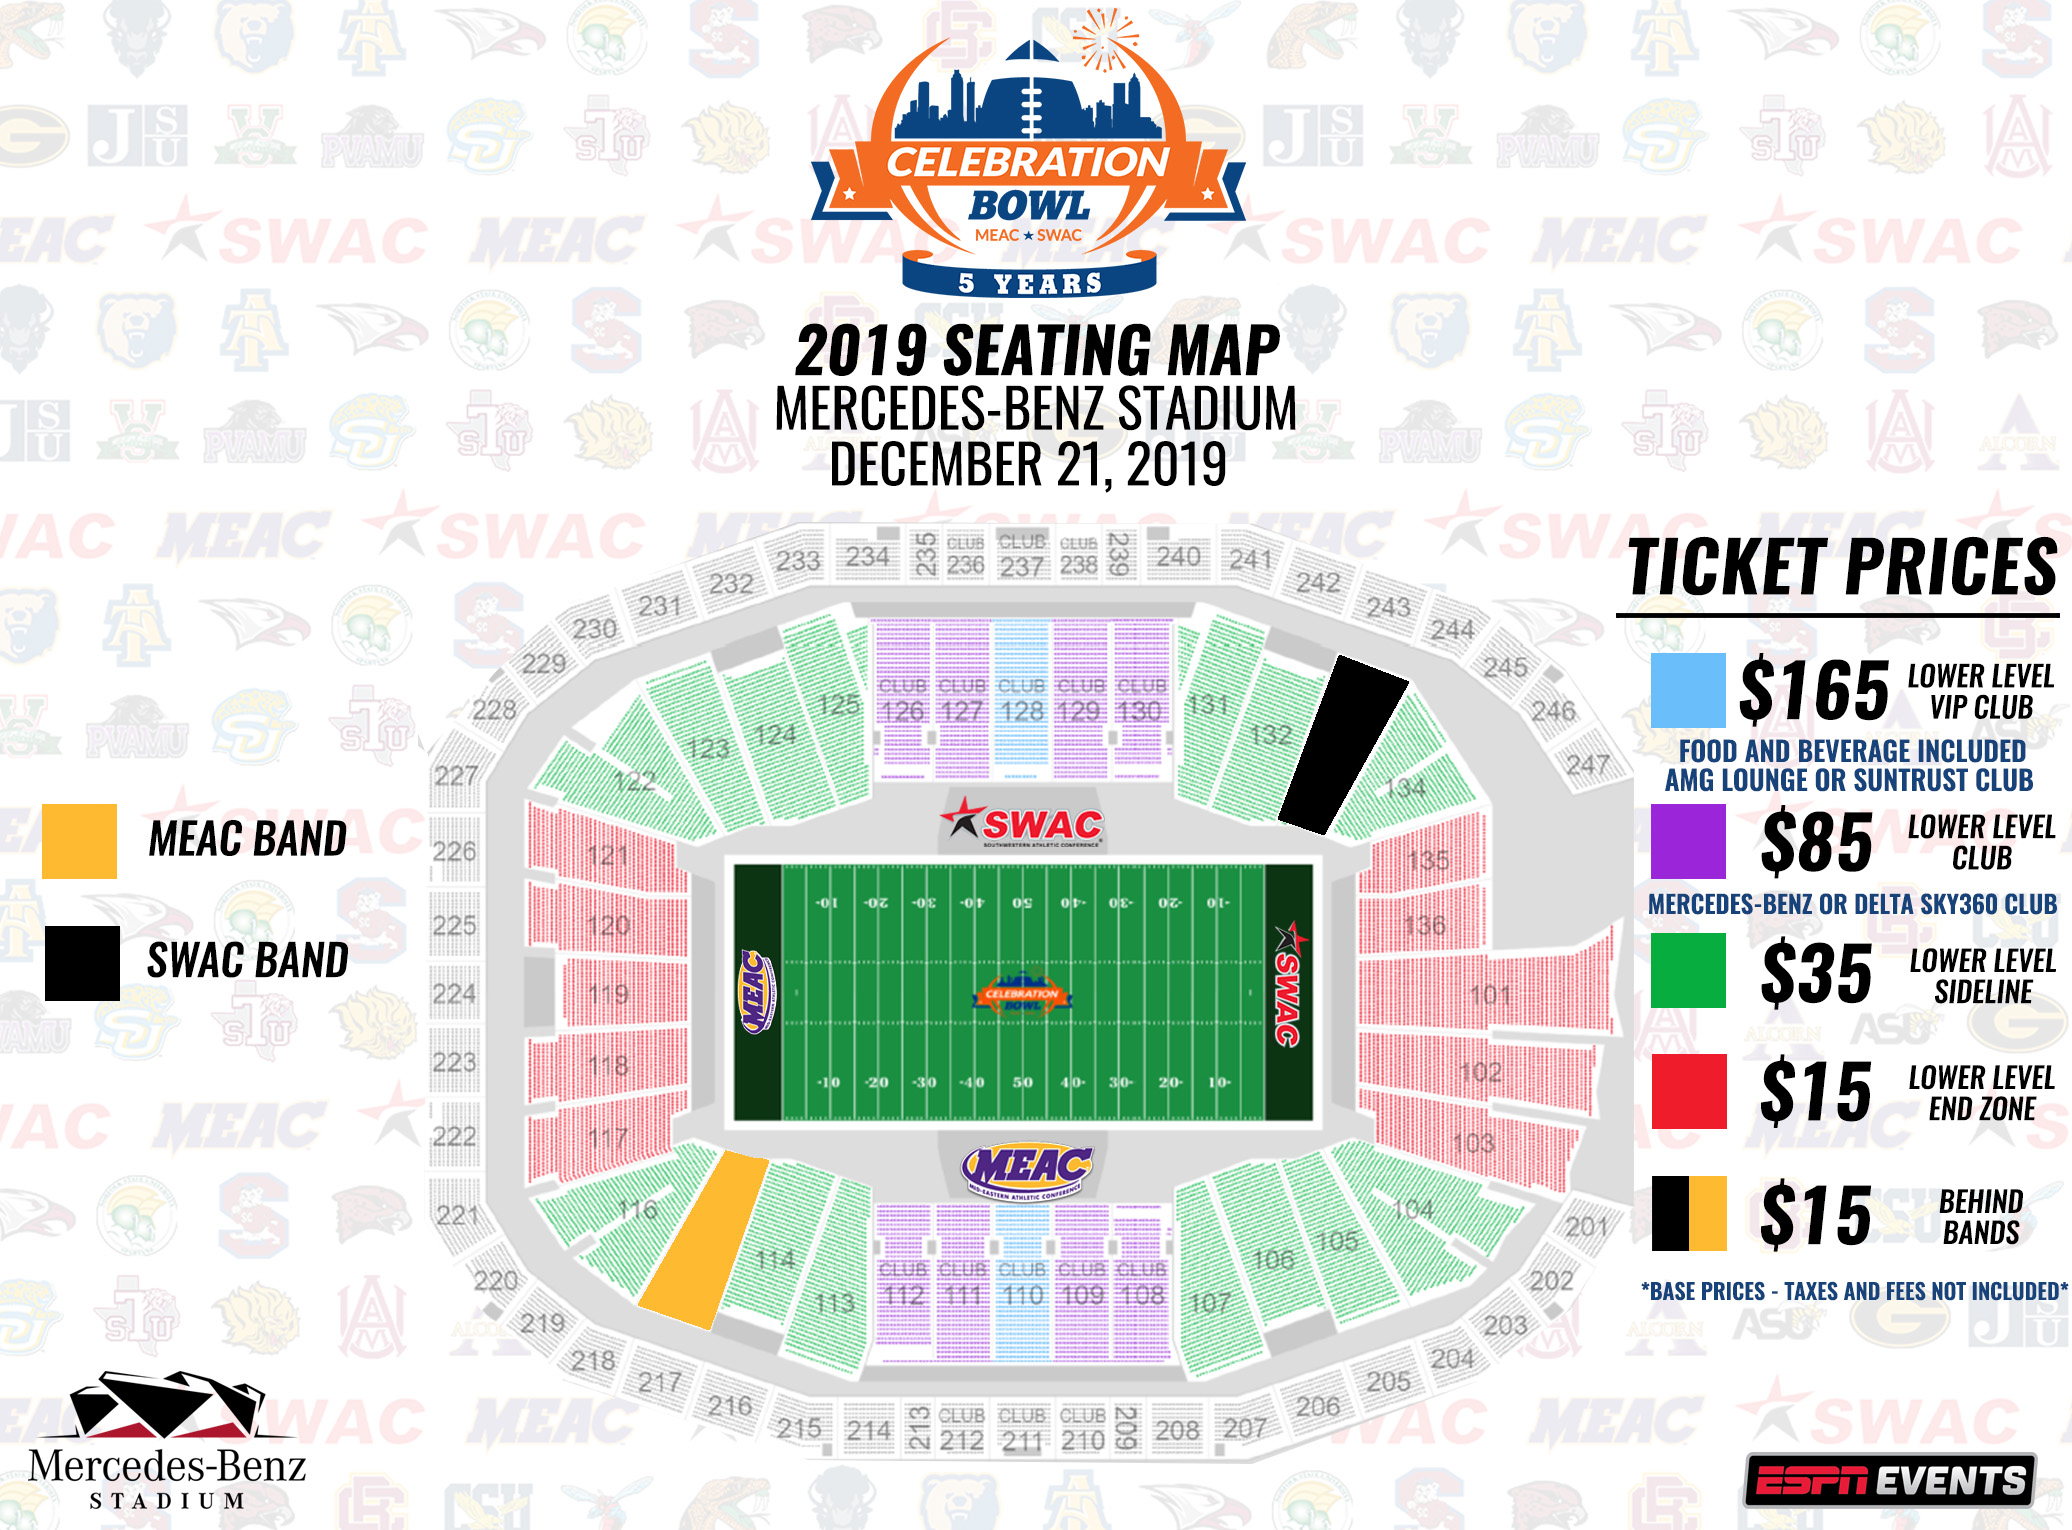 Air Force Academy Football Seating Chart